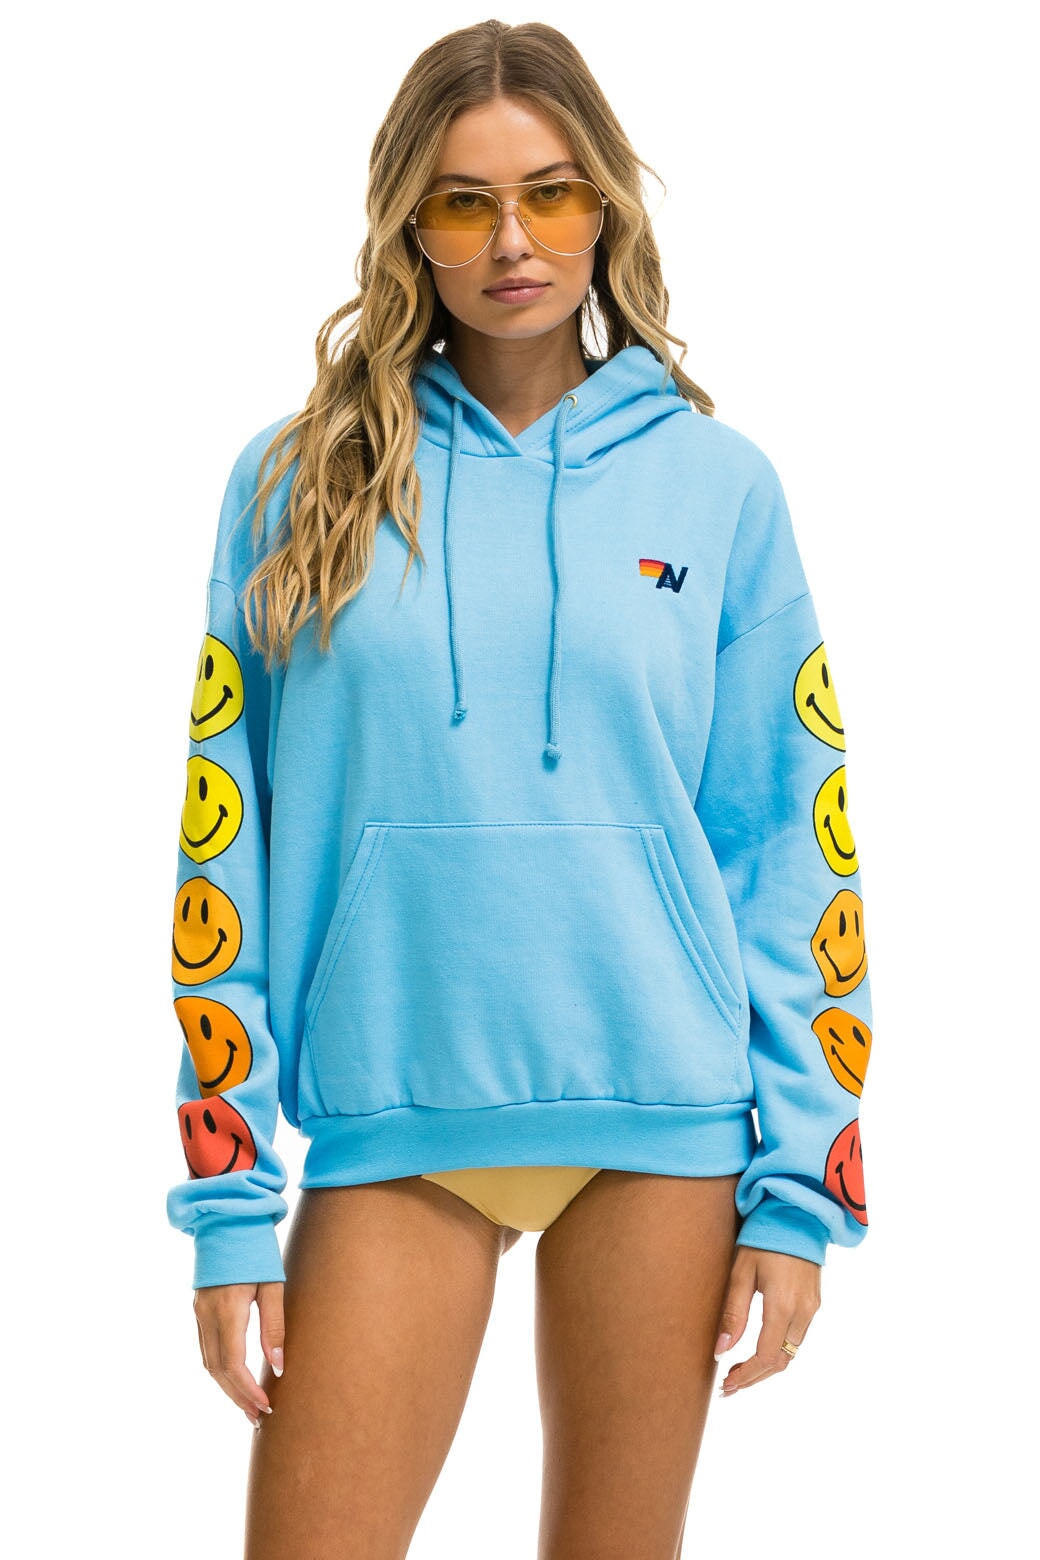 SMILEY SUNSET RELAXED PULLOVER HOODIE - SKY Hoodie Aviator Nation 